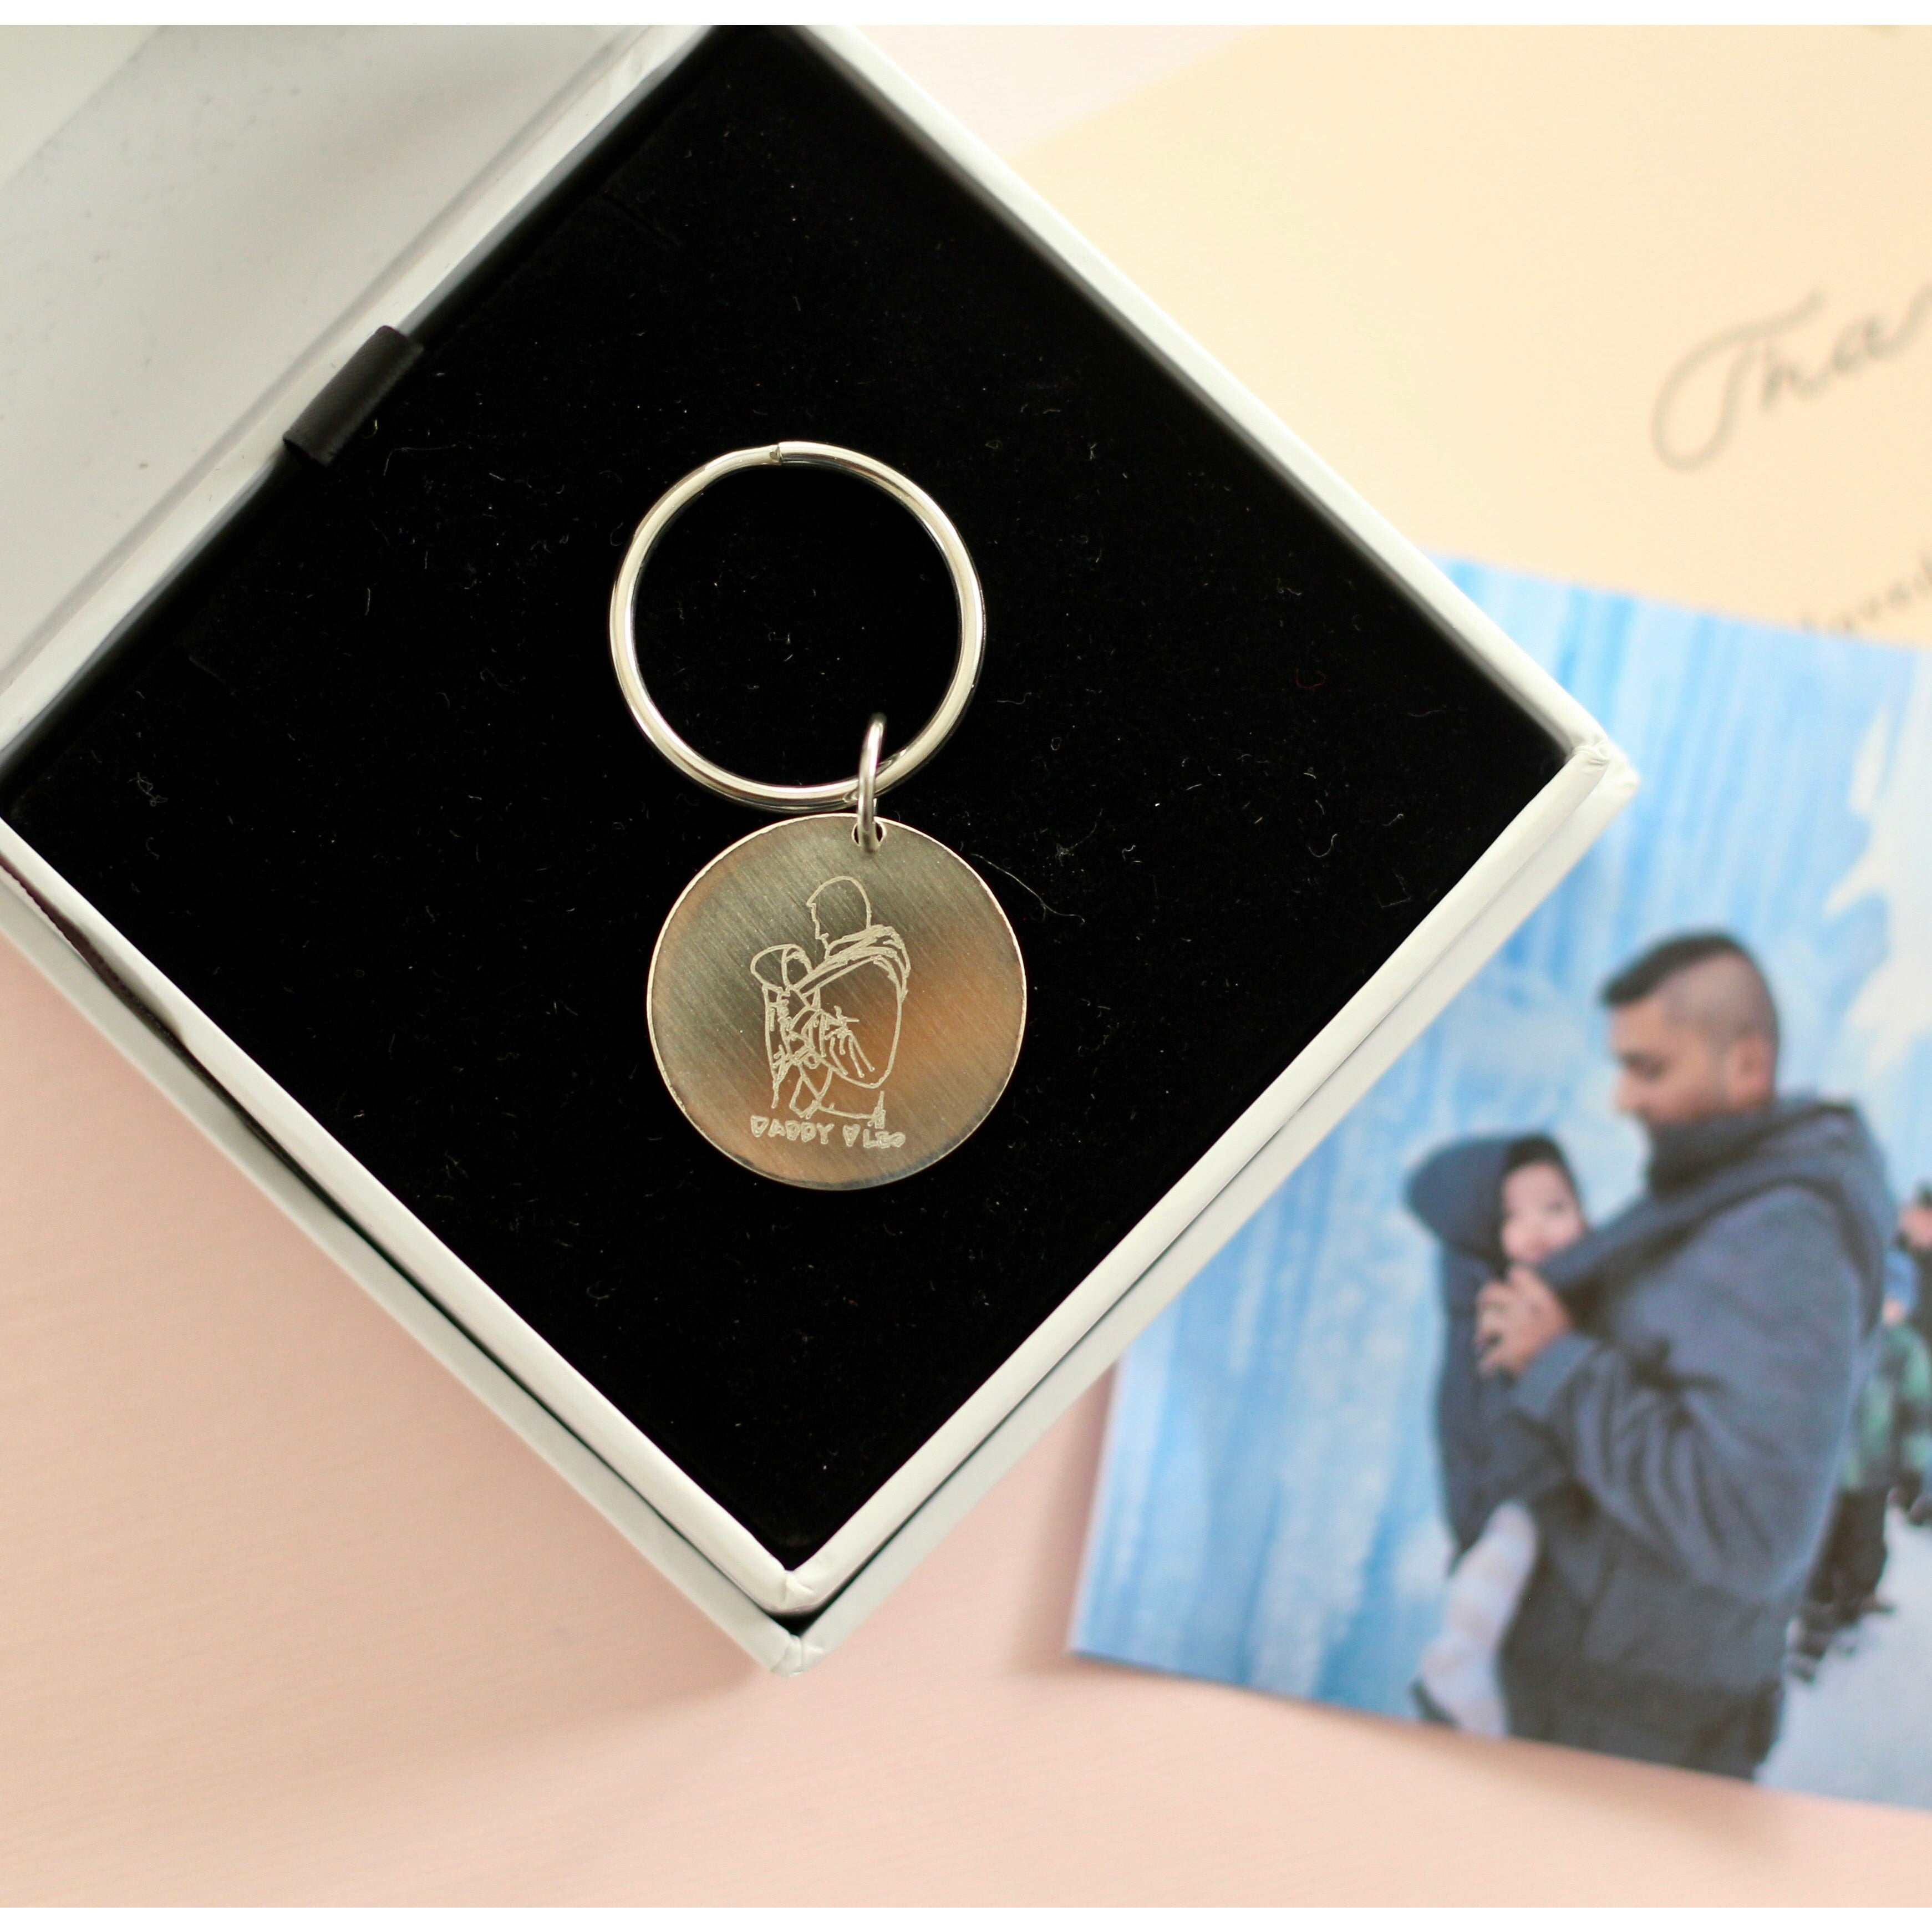 Custom handmade sterling silver coin key chain with personalized photo engraved 